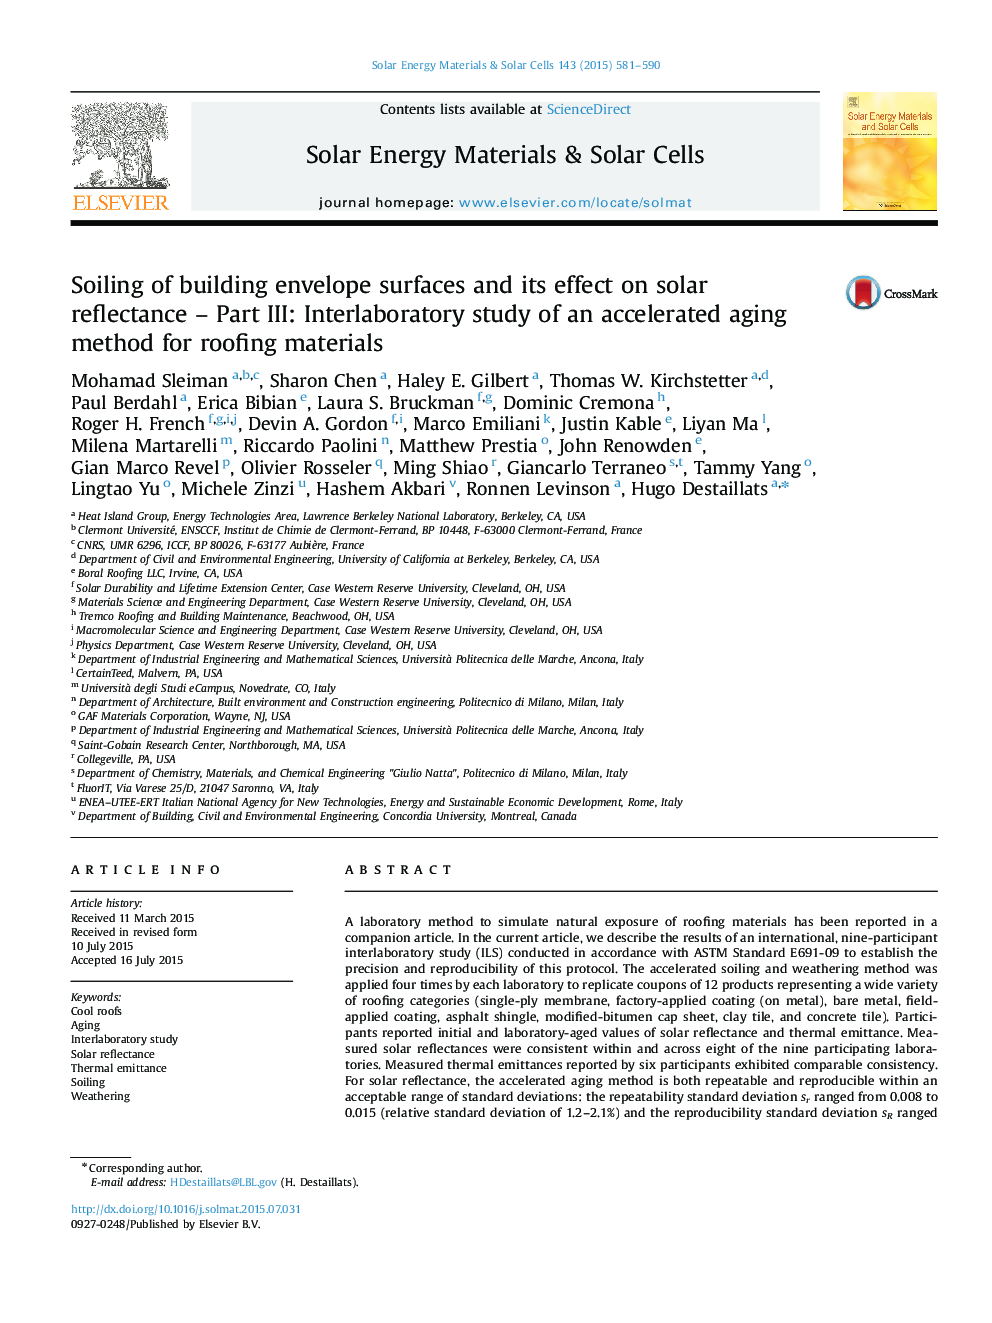 Soiling of building envelope surfaces and its effect on solar reflectance - Part III: Interlaboratory study of an accelerated aging method for roofing materials